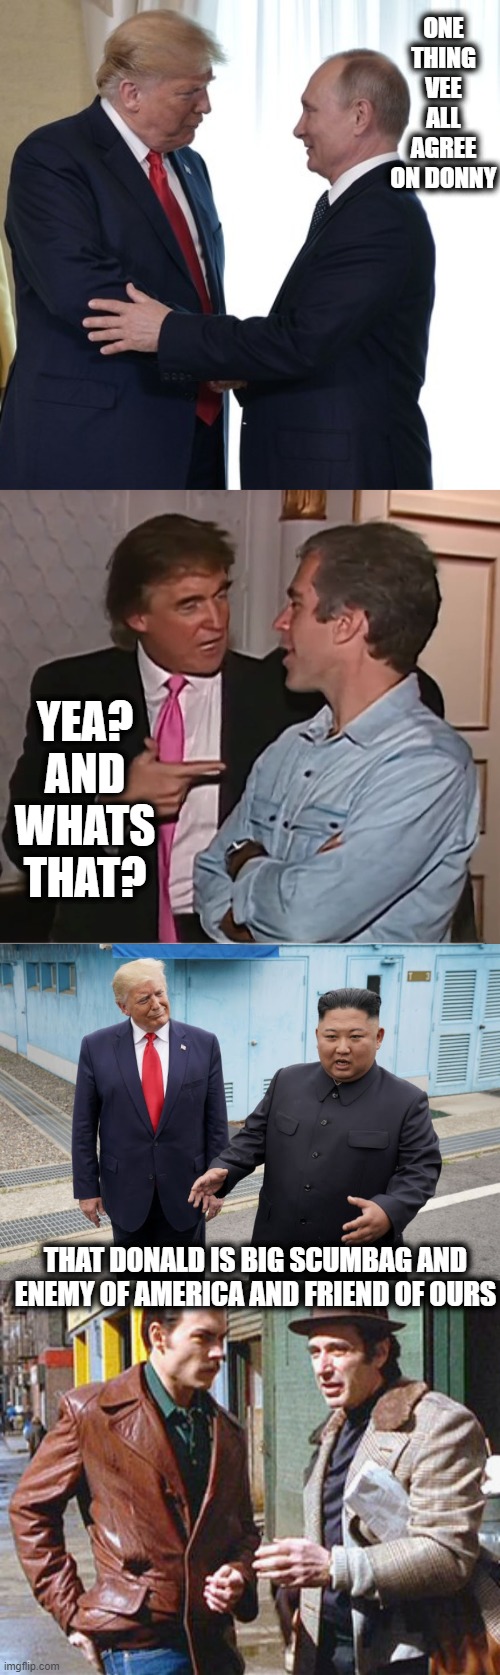 Pick a side. pedo dictator or democracy. | ONE THING VEE ALL AGREE ON DONNY; YEA? AND WHATS THAT? THAT DONALD IS BIG SCUMBAG AND ENEMY OF AMERICA AND FRIEND OF OURS | image tagged in trump putin dirty deals,trump epstein party,trump kim jong-un,donnie brasco a friend of mine,donald trump is an idiot,politics | made w/ Imgflip meme maker